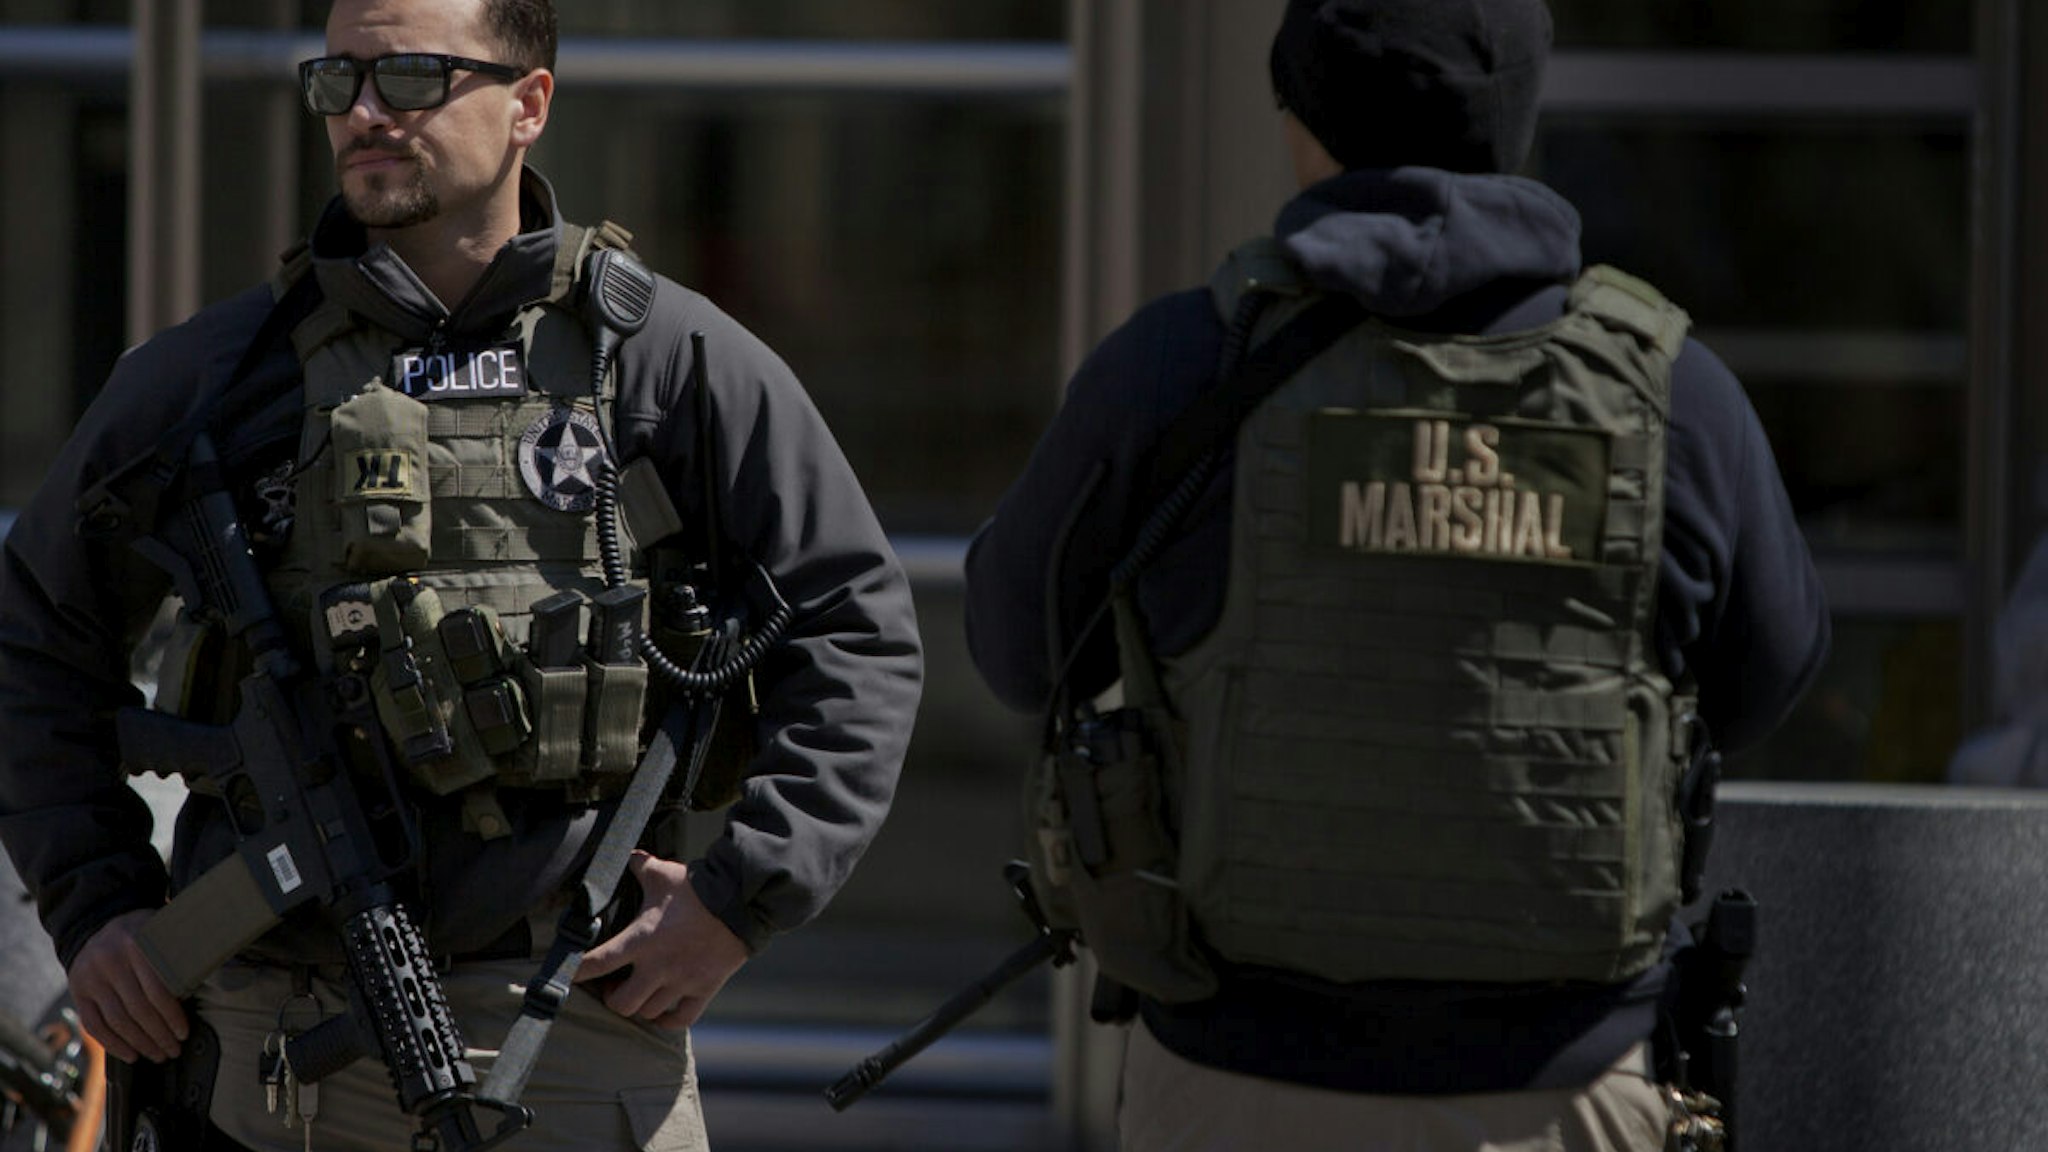 U.S. Marshals stand outside U.S. Federal Court in Brooklyn during the arraignment on terrorism charges of two Queens women, identified as 28-year-old Noelle Velentzas and 31-year-old Asia Siddiqui, as well as American citizen and accused Al Queda member Muhanad Mahmoud al Farekh, 29, April 2, 2015 in New York City